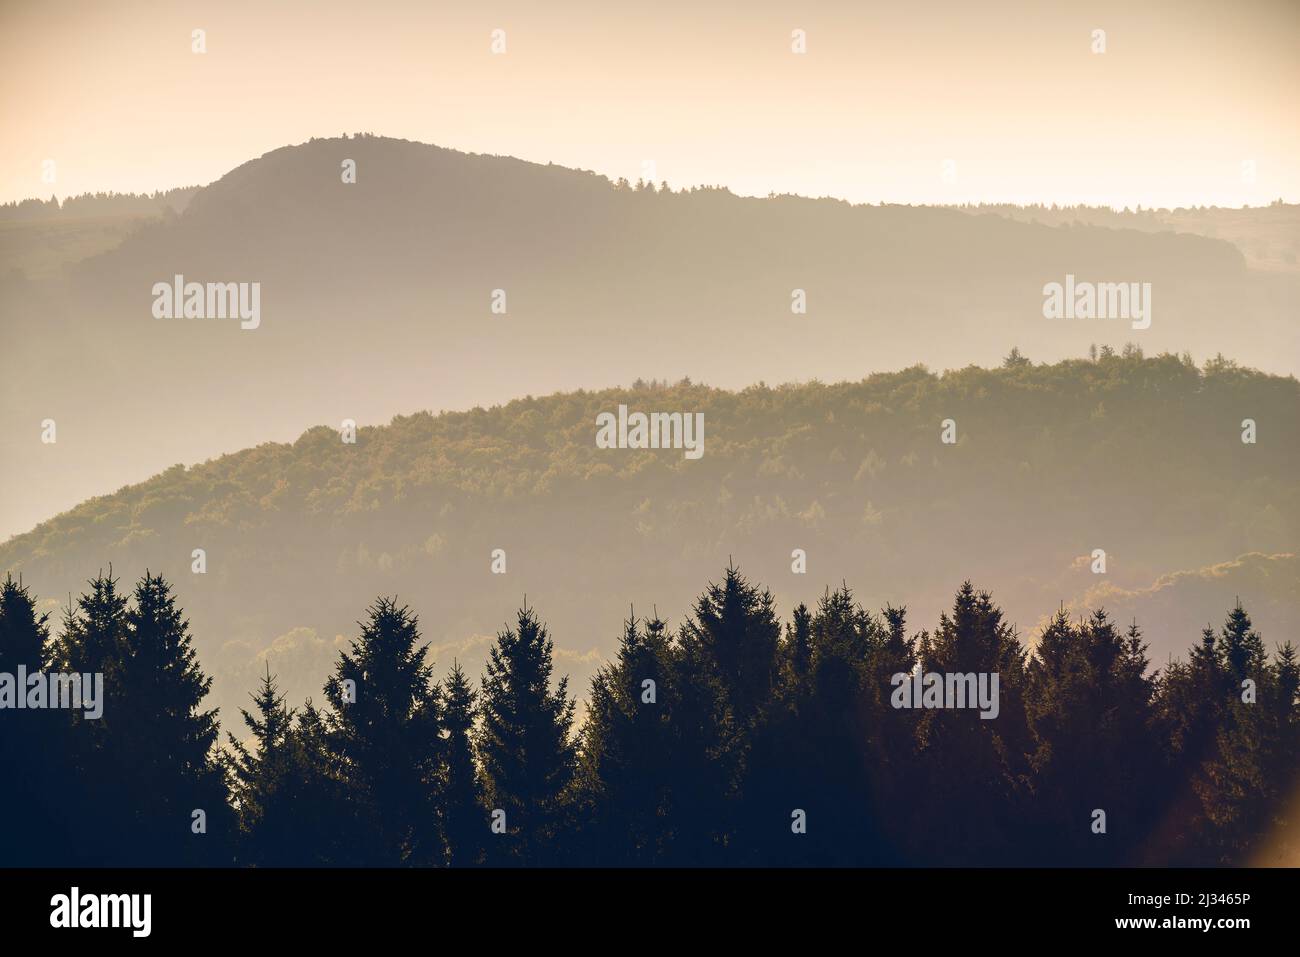 Autumn forest in the morning light, Ehrenberg, Rhoen, Hesse, Germany, Europe Stock Photo